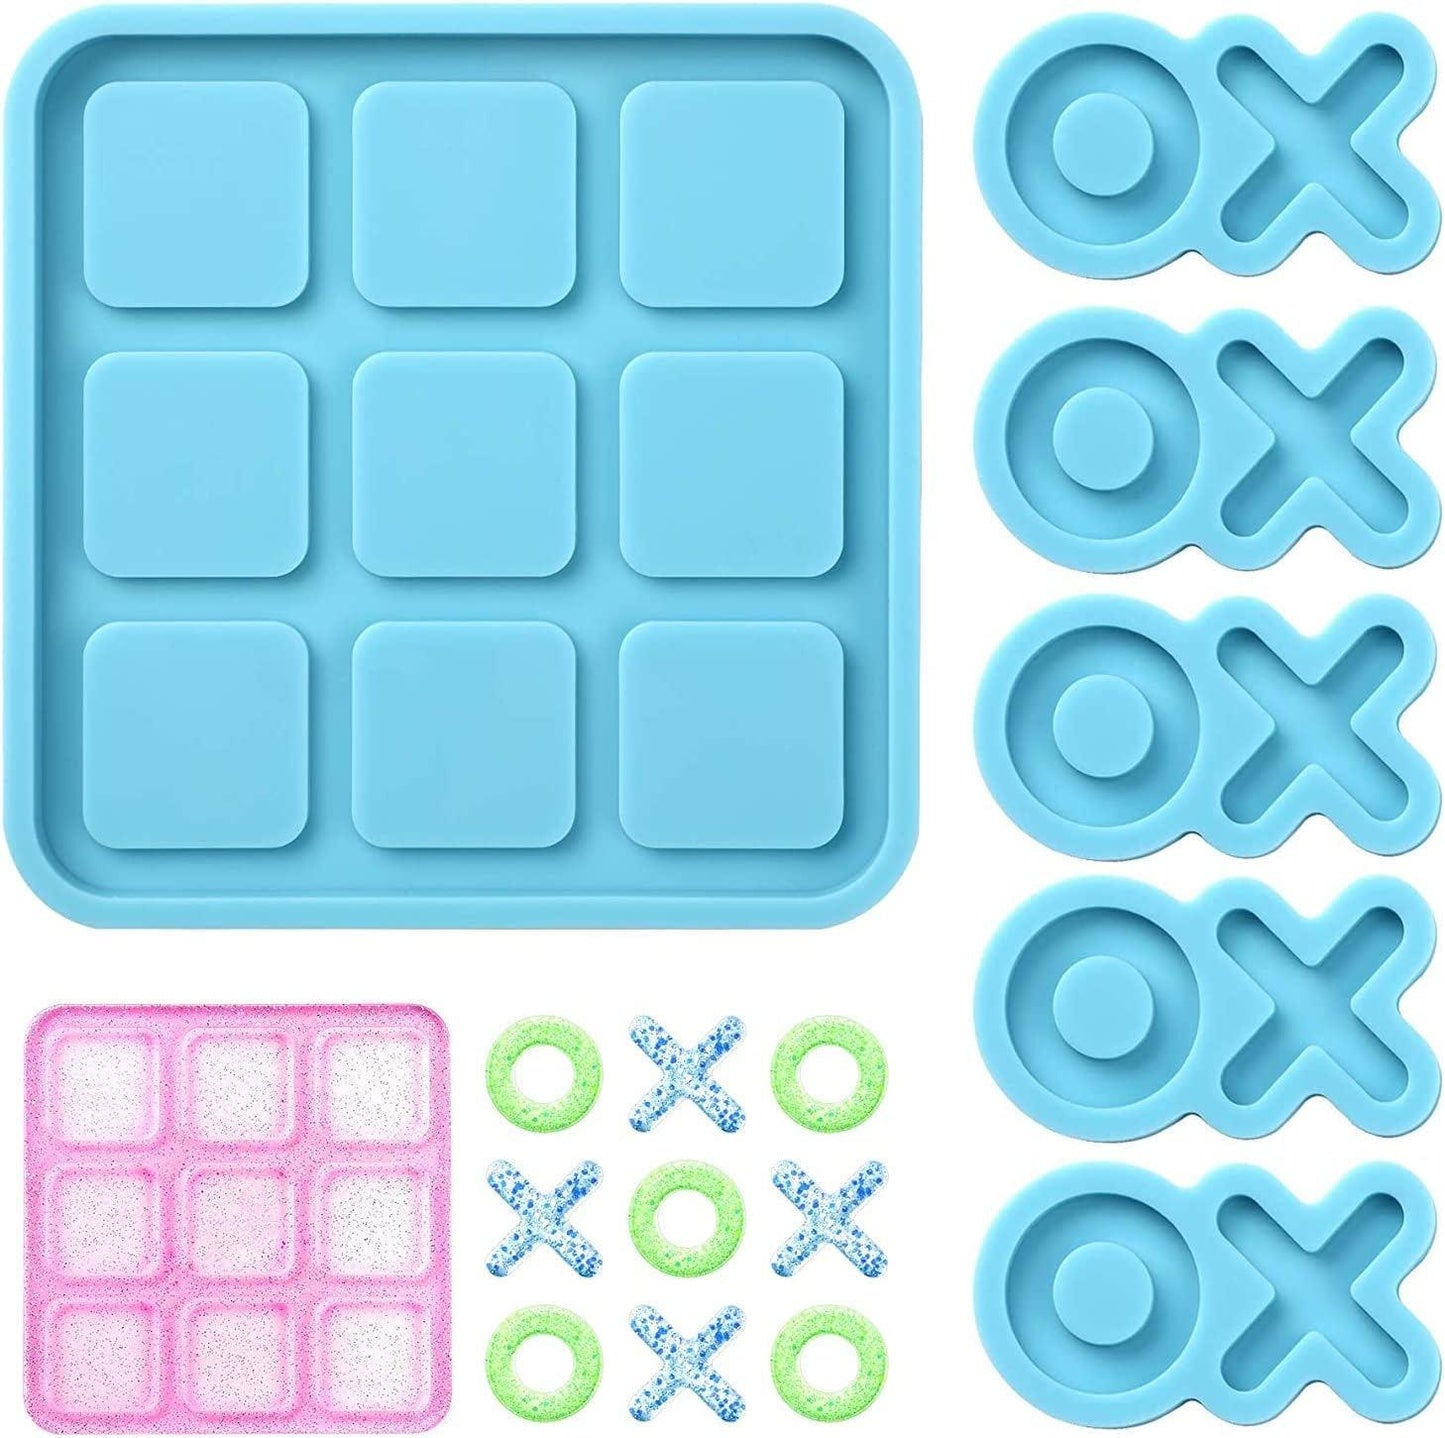 Tic Tac Toe Resin Mold with 5 Chess Pieces Molds, X O Board Game Silicone Molds for Resin Casting,Diy Tabletop Board Game - WoodArtSupply